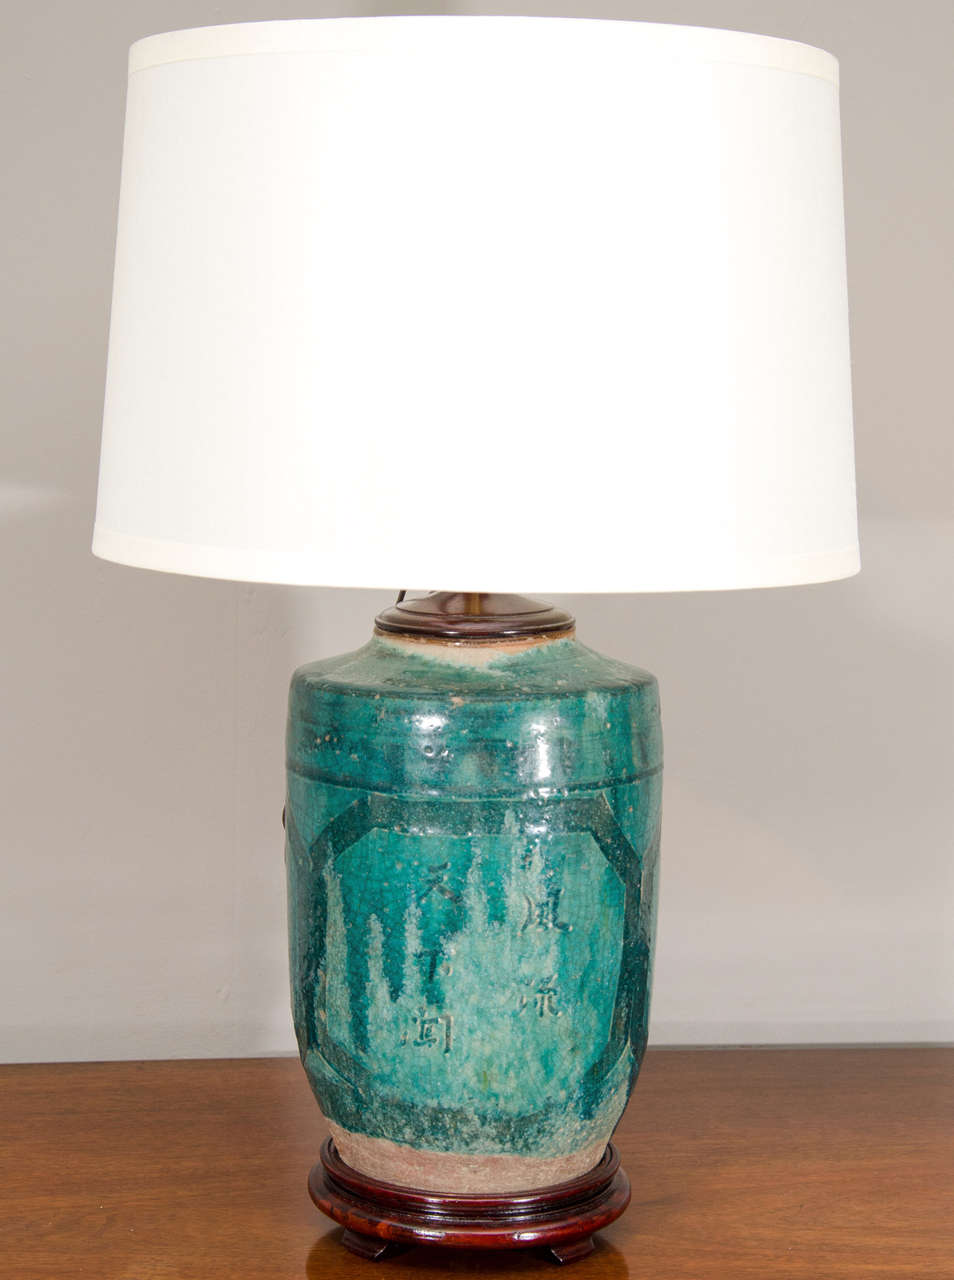 Jade Green Earthenware Lamp.
*Shade Not Included.